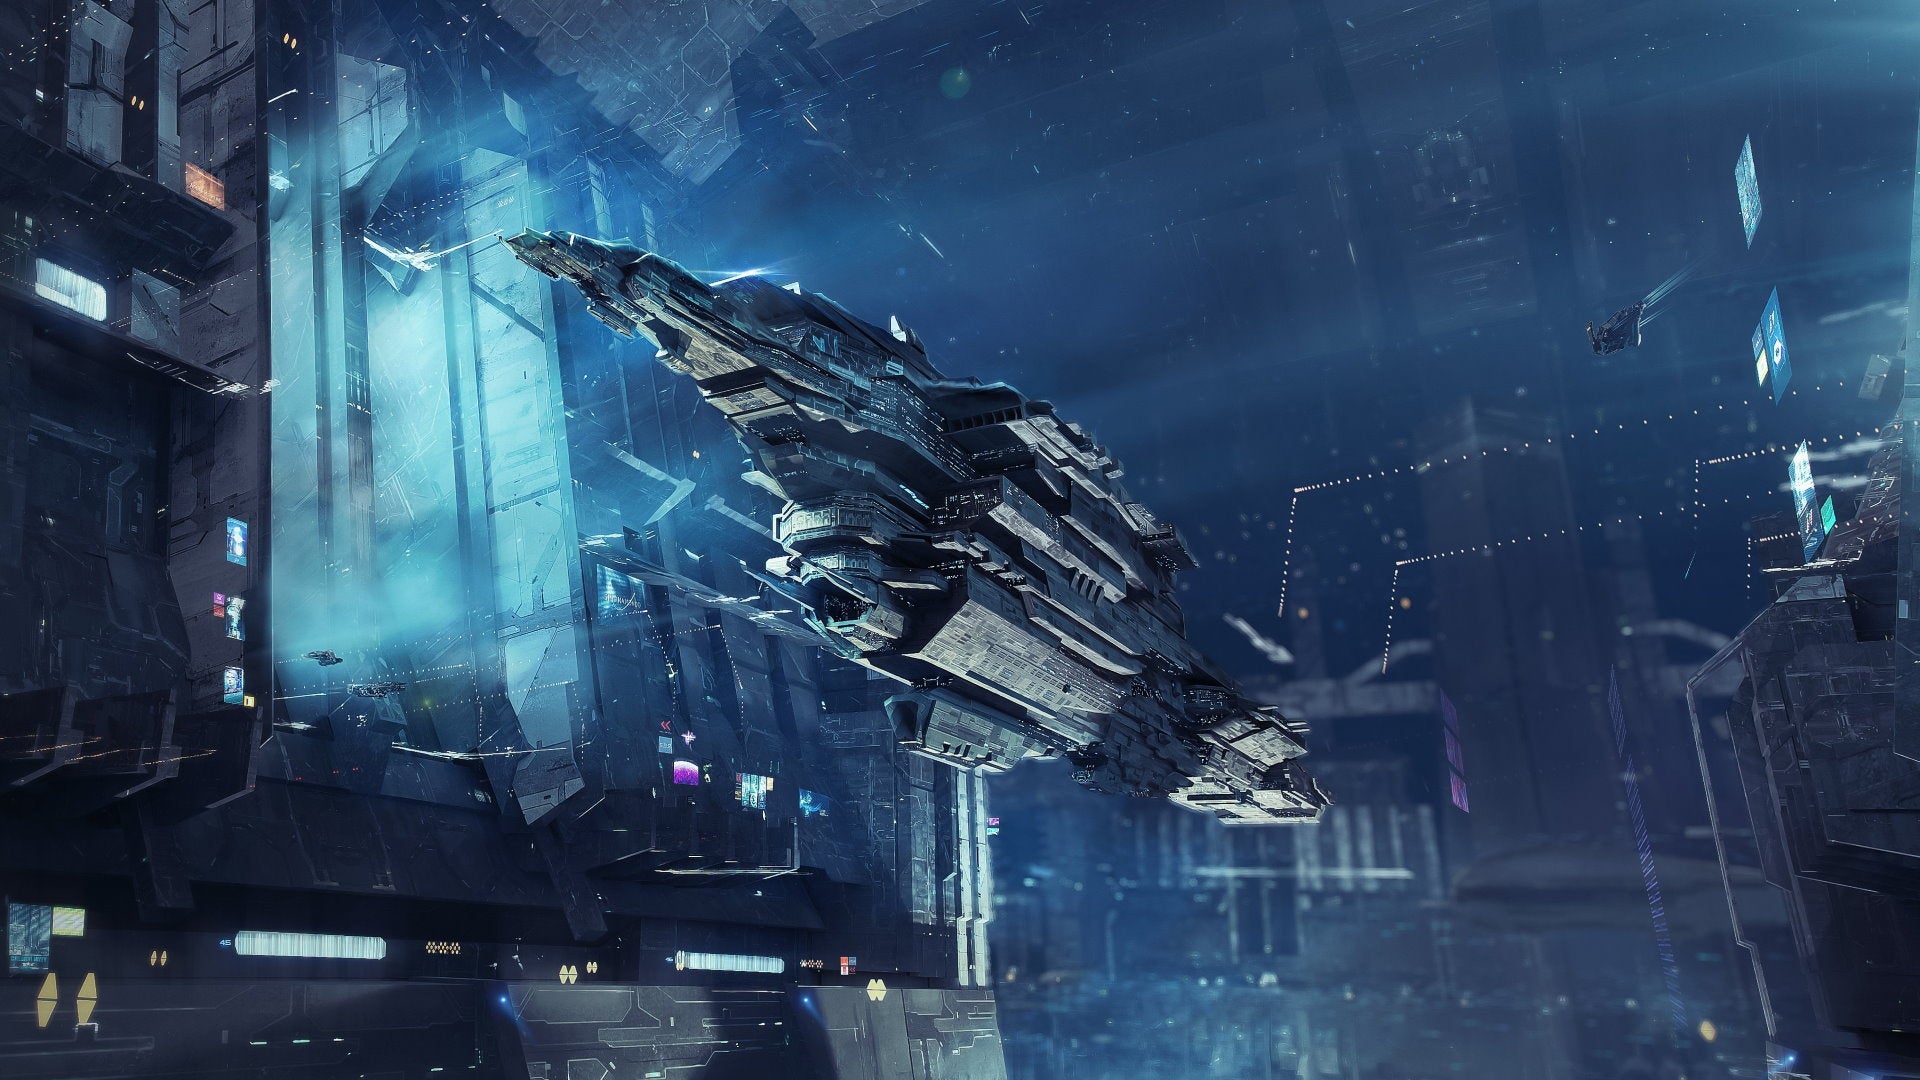 A large blue spaceship in EVE Online